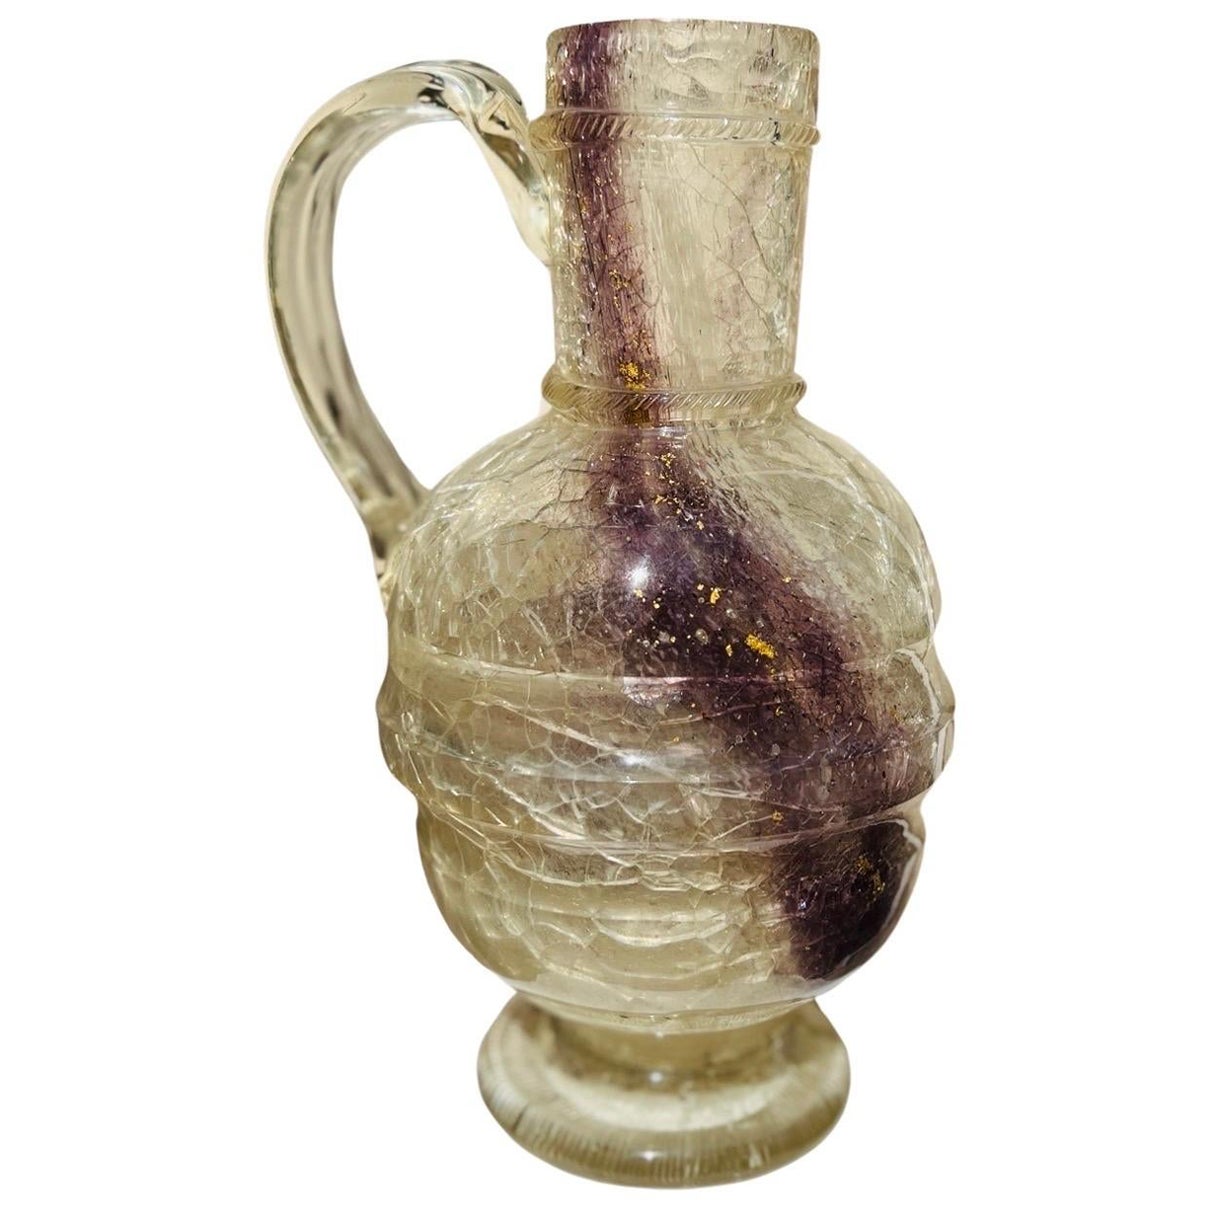 After The Roman Antique - Rock Crystal, Glass & Gold Flecking Grand Tour Pitcher For Sale